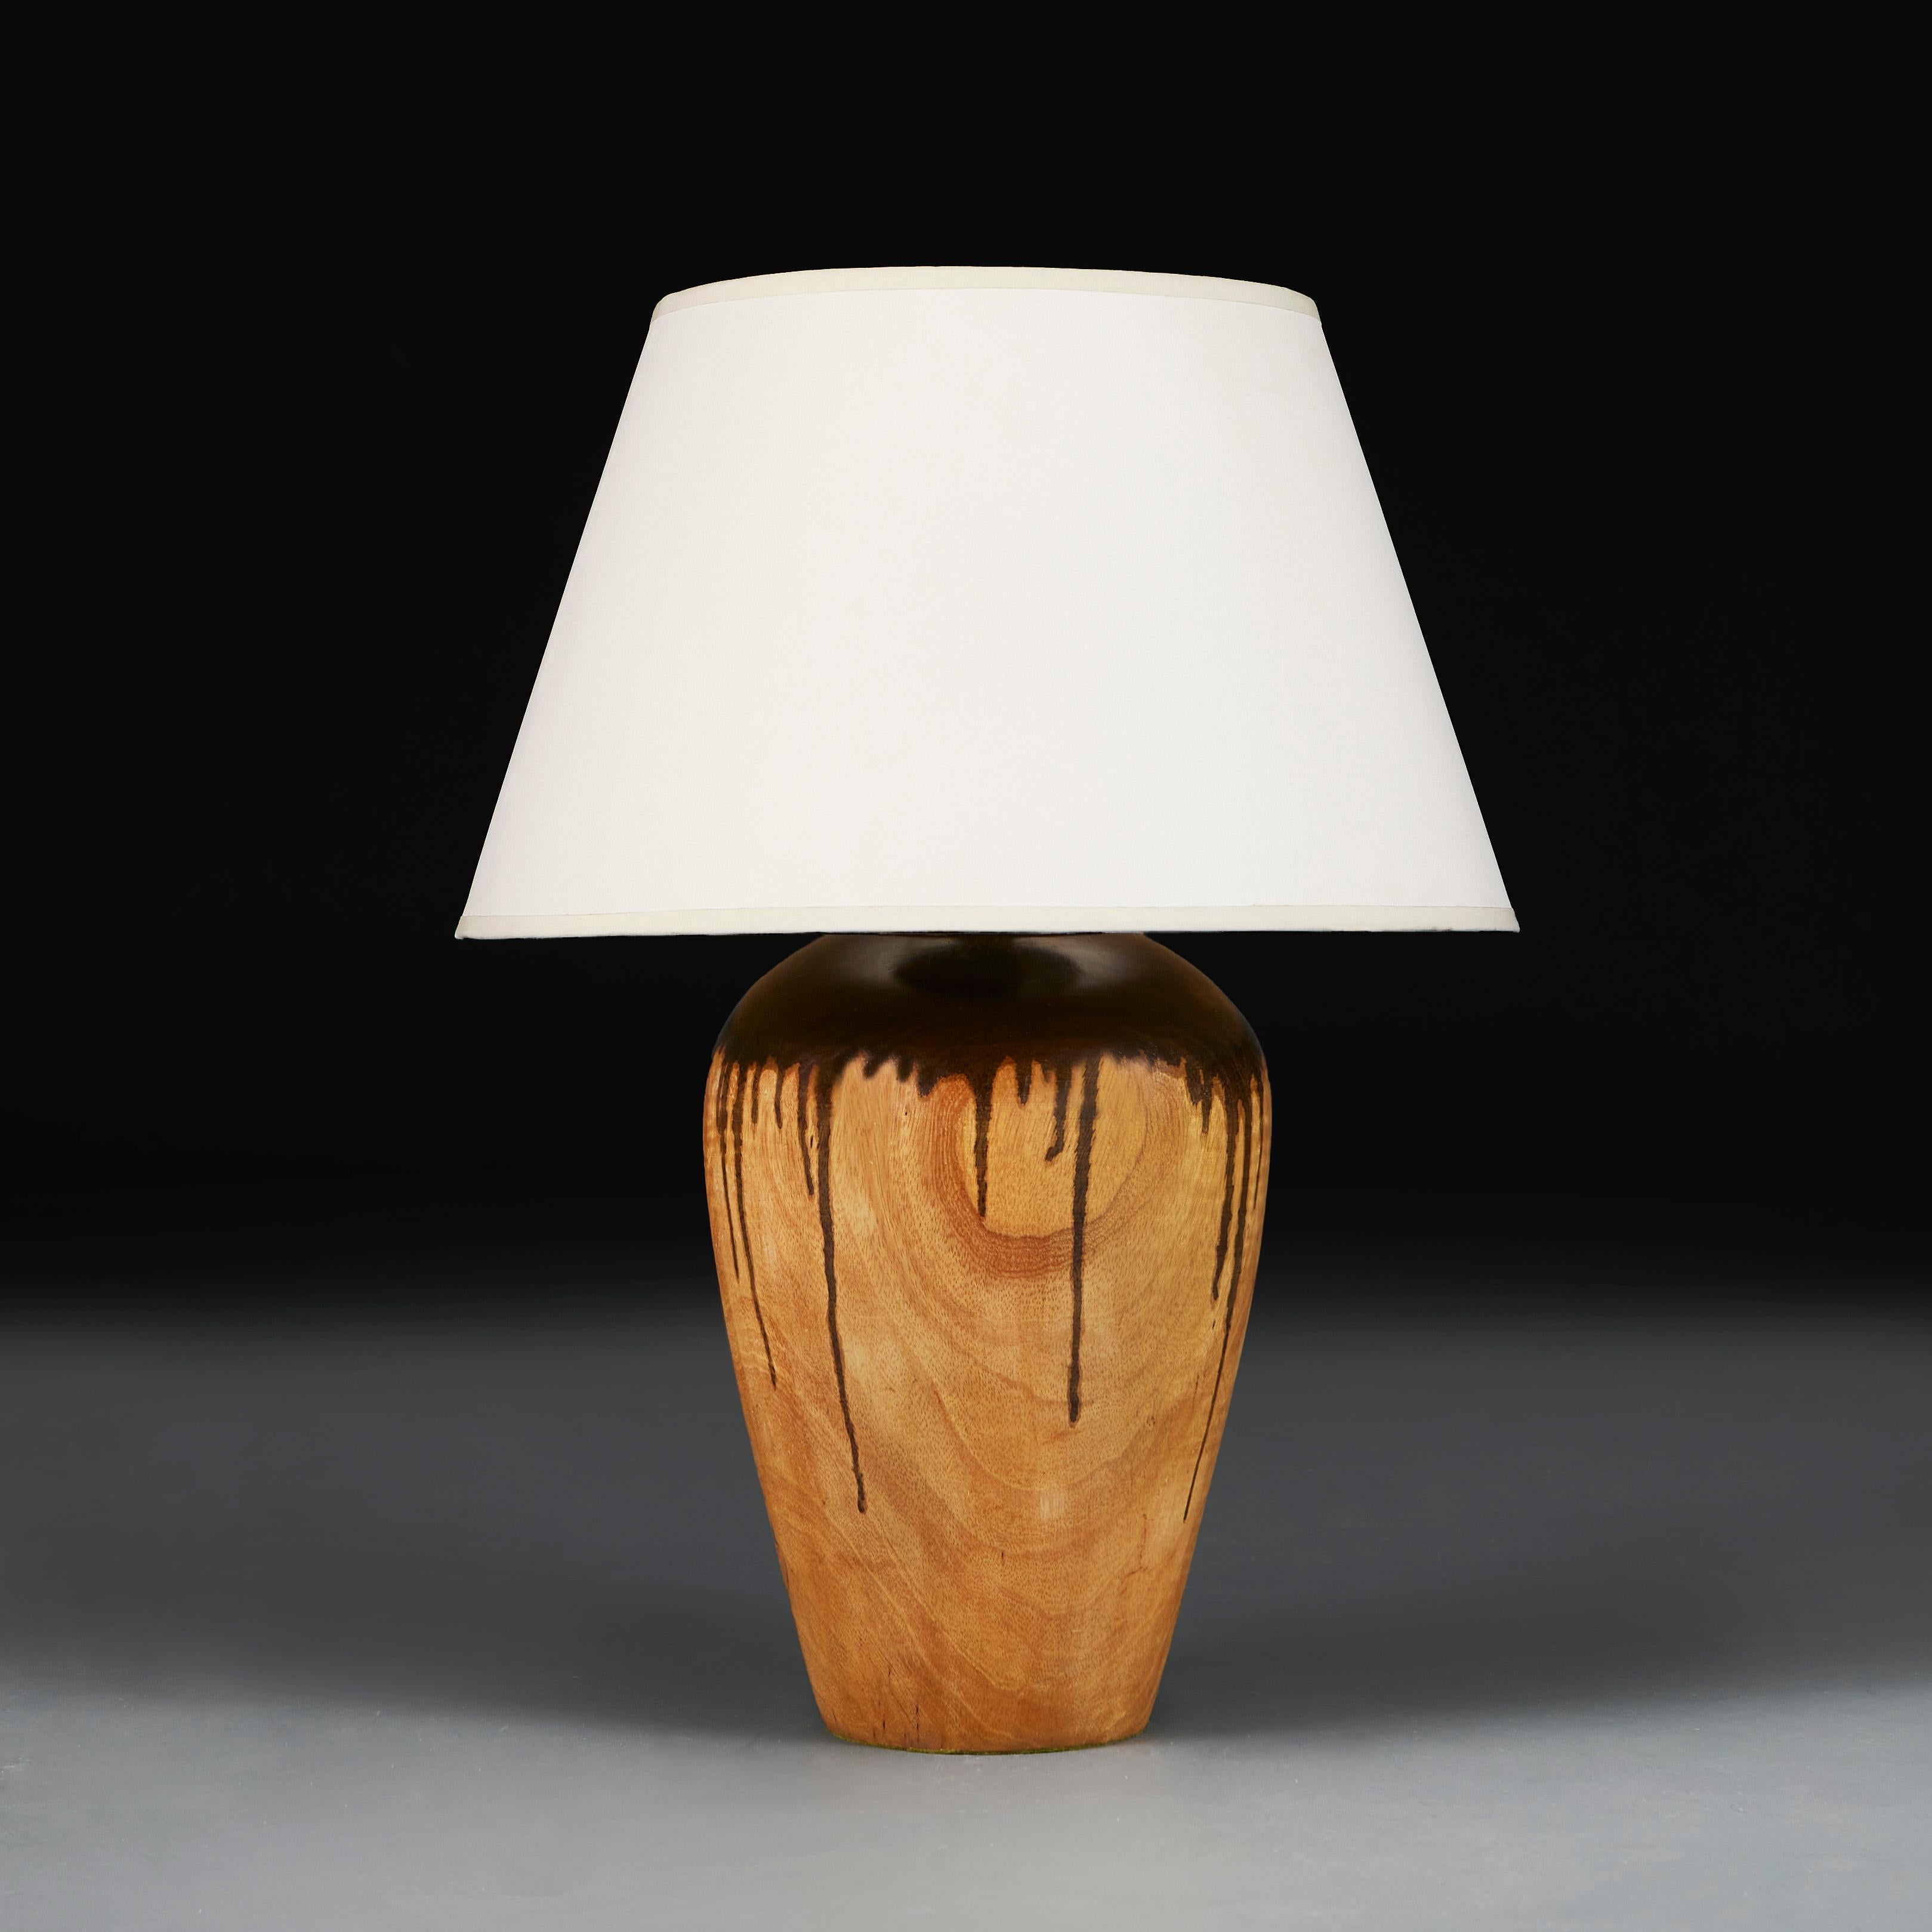 England, circa 1960

A turned beech wood vase with dark drip stain applied round the rim, now converted as a lamp. 

Height of vase 32.00cm

Diameter of base 13.00cm

Photographed with a 16” diameter Pembroke card lampshade.

Please note: This is